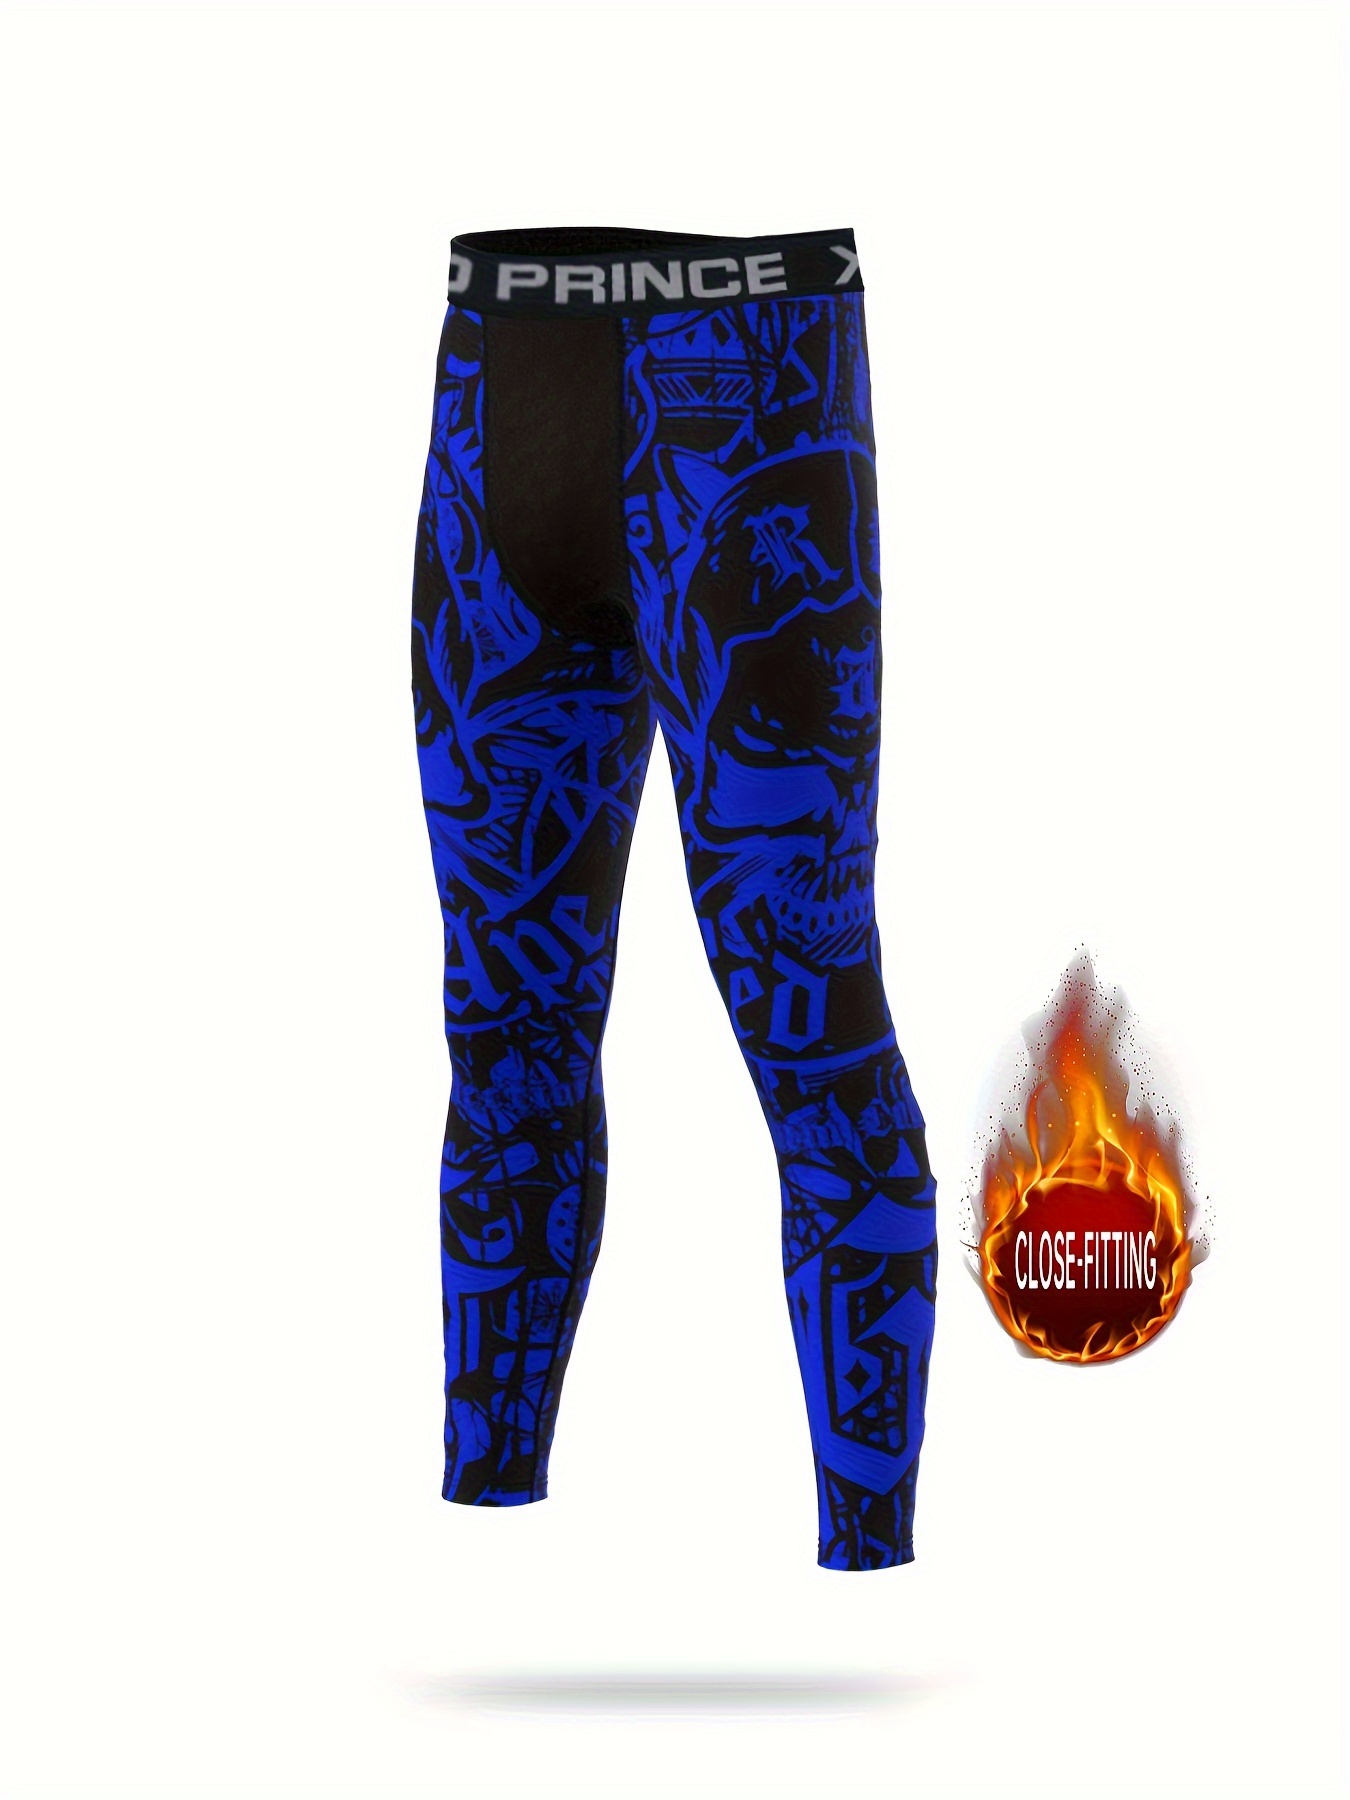 Quick-Drying Men's Compression Pants for Running, Training, and Fitness -  Moisture-Wicking and Breathable Leggings with Graffiti Design